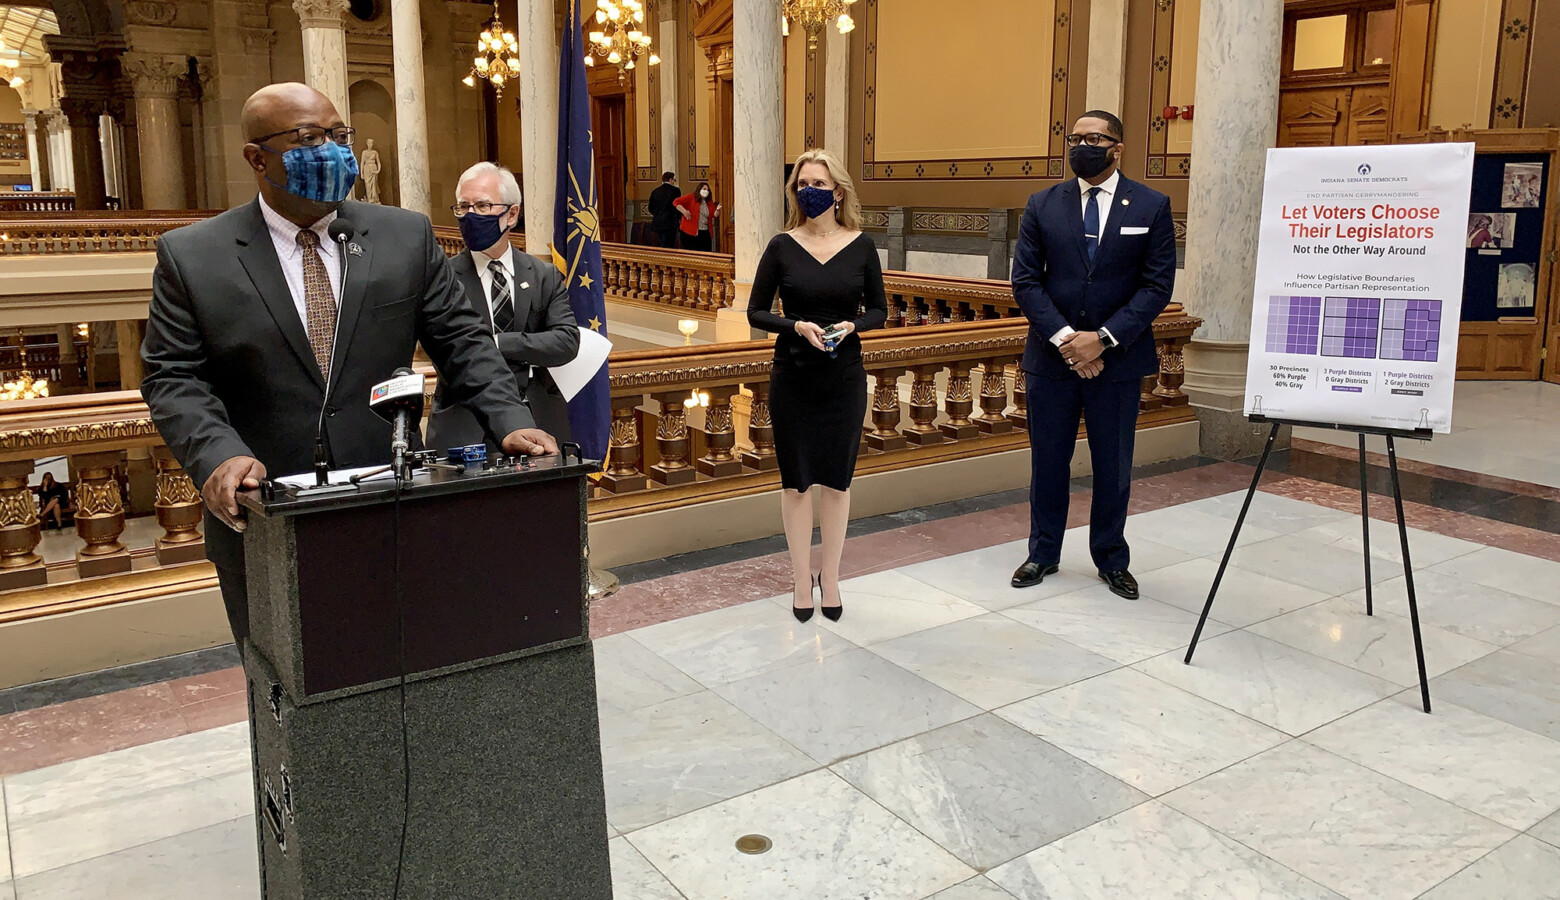 Members of the Indiana Senate Democratic Caucus discuss their call for redistricting reform. (Brandon Smith/IPB News)